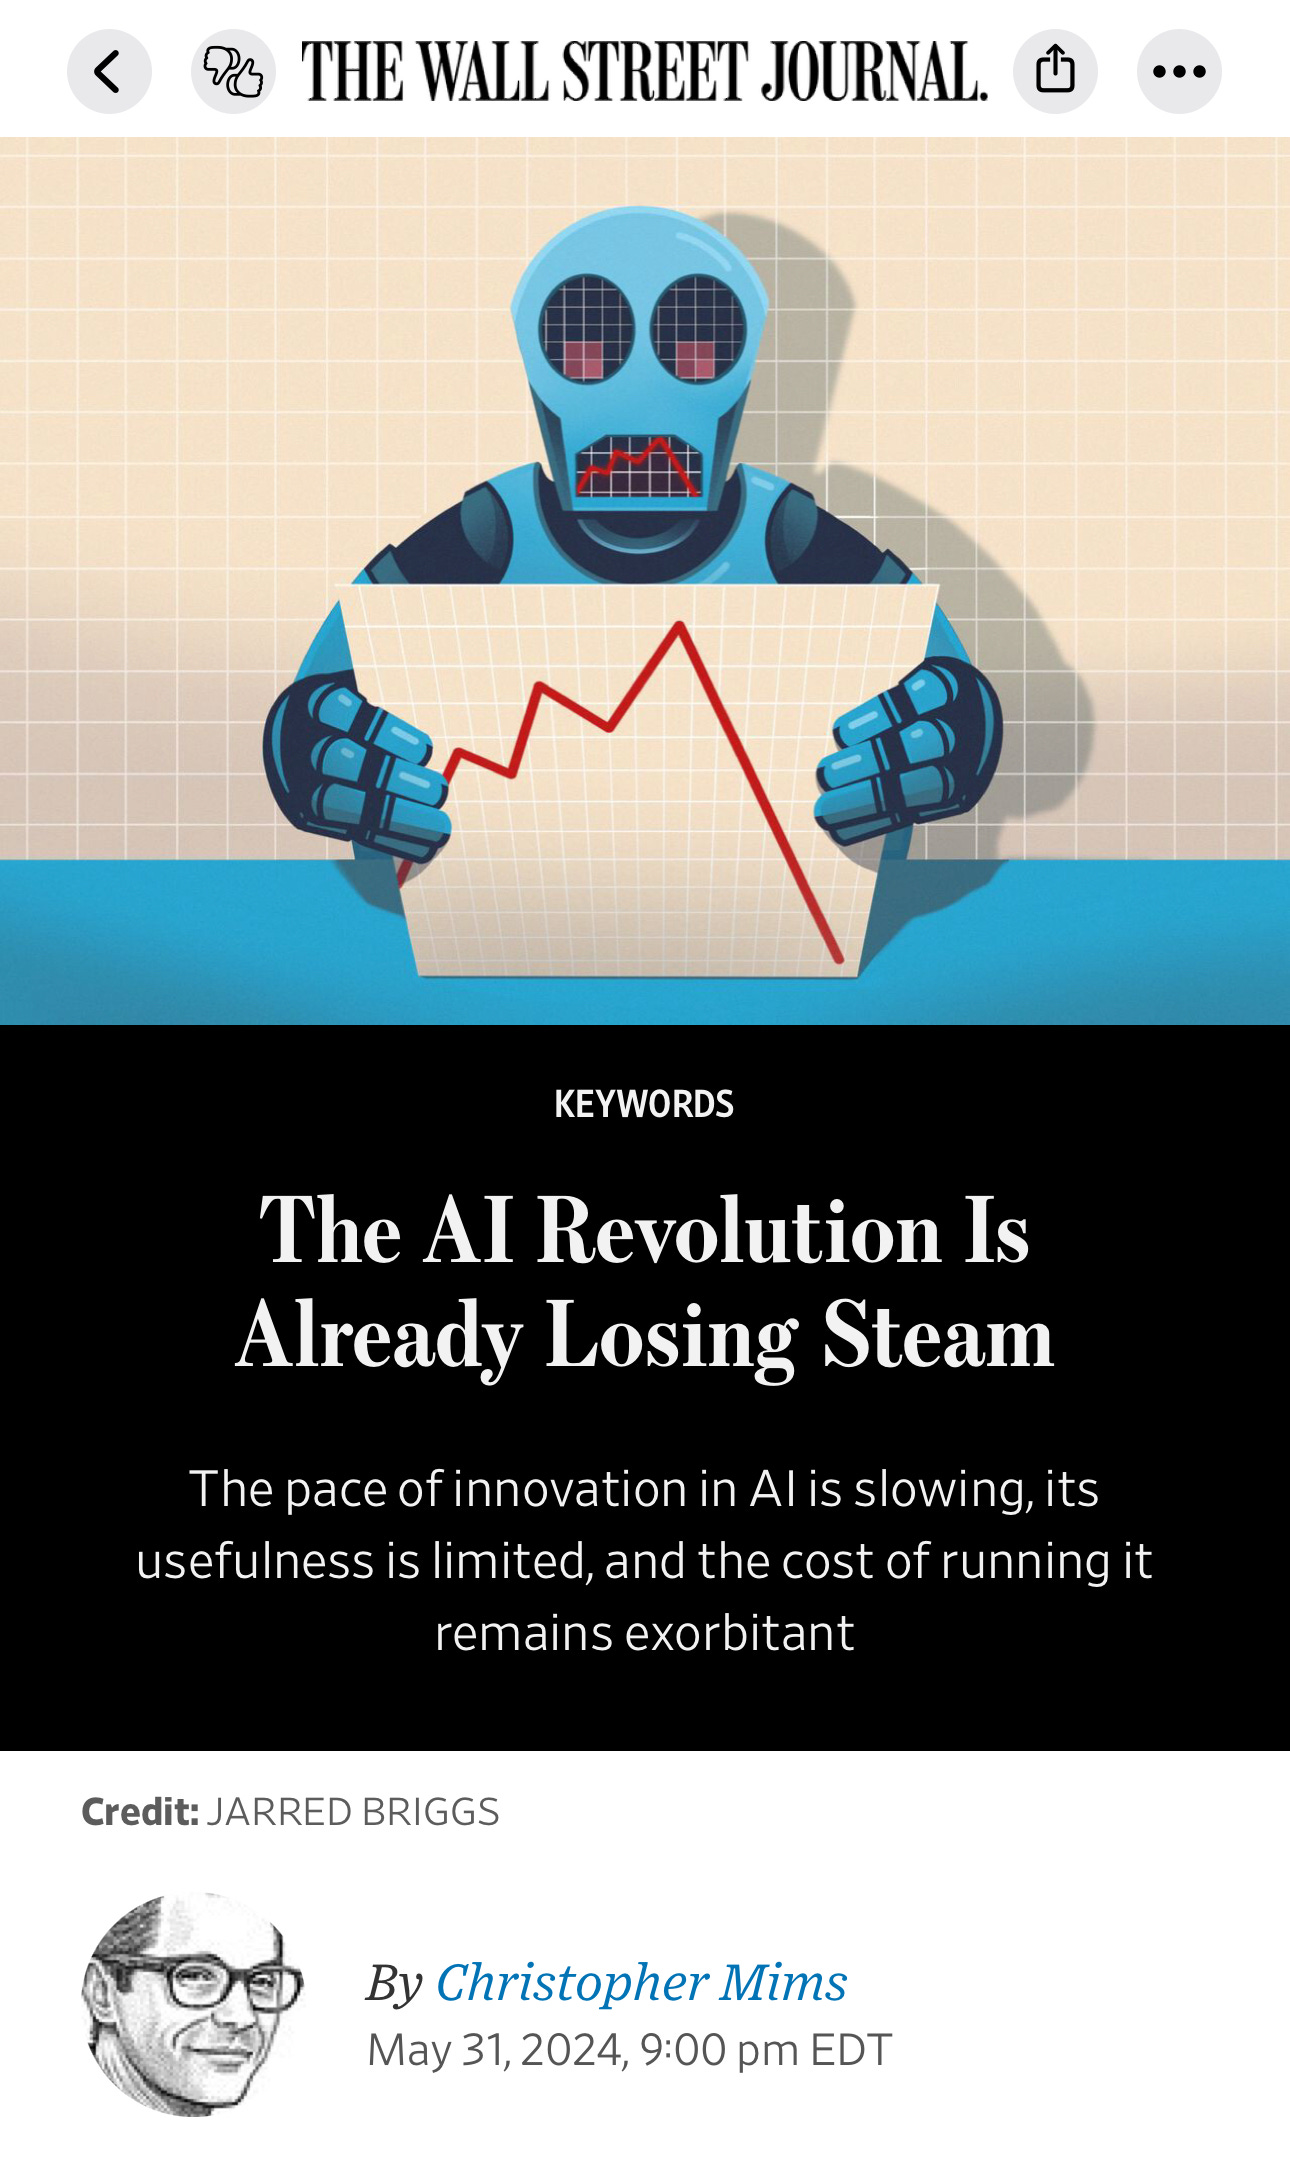 Cover art from a Wall Street Journal article titled "The AI Revolution is already losing steam" with a subhead stating "The pace of innovation in AI is slowing, its usefulness is limited, and the cost of running it remains exorbitant".